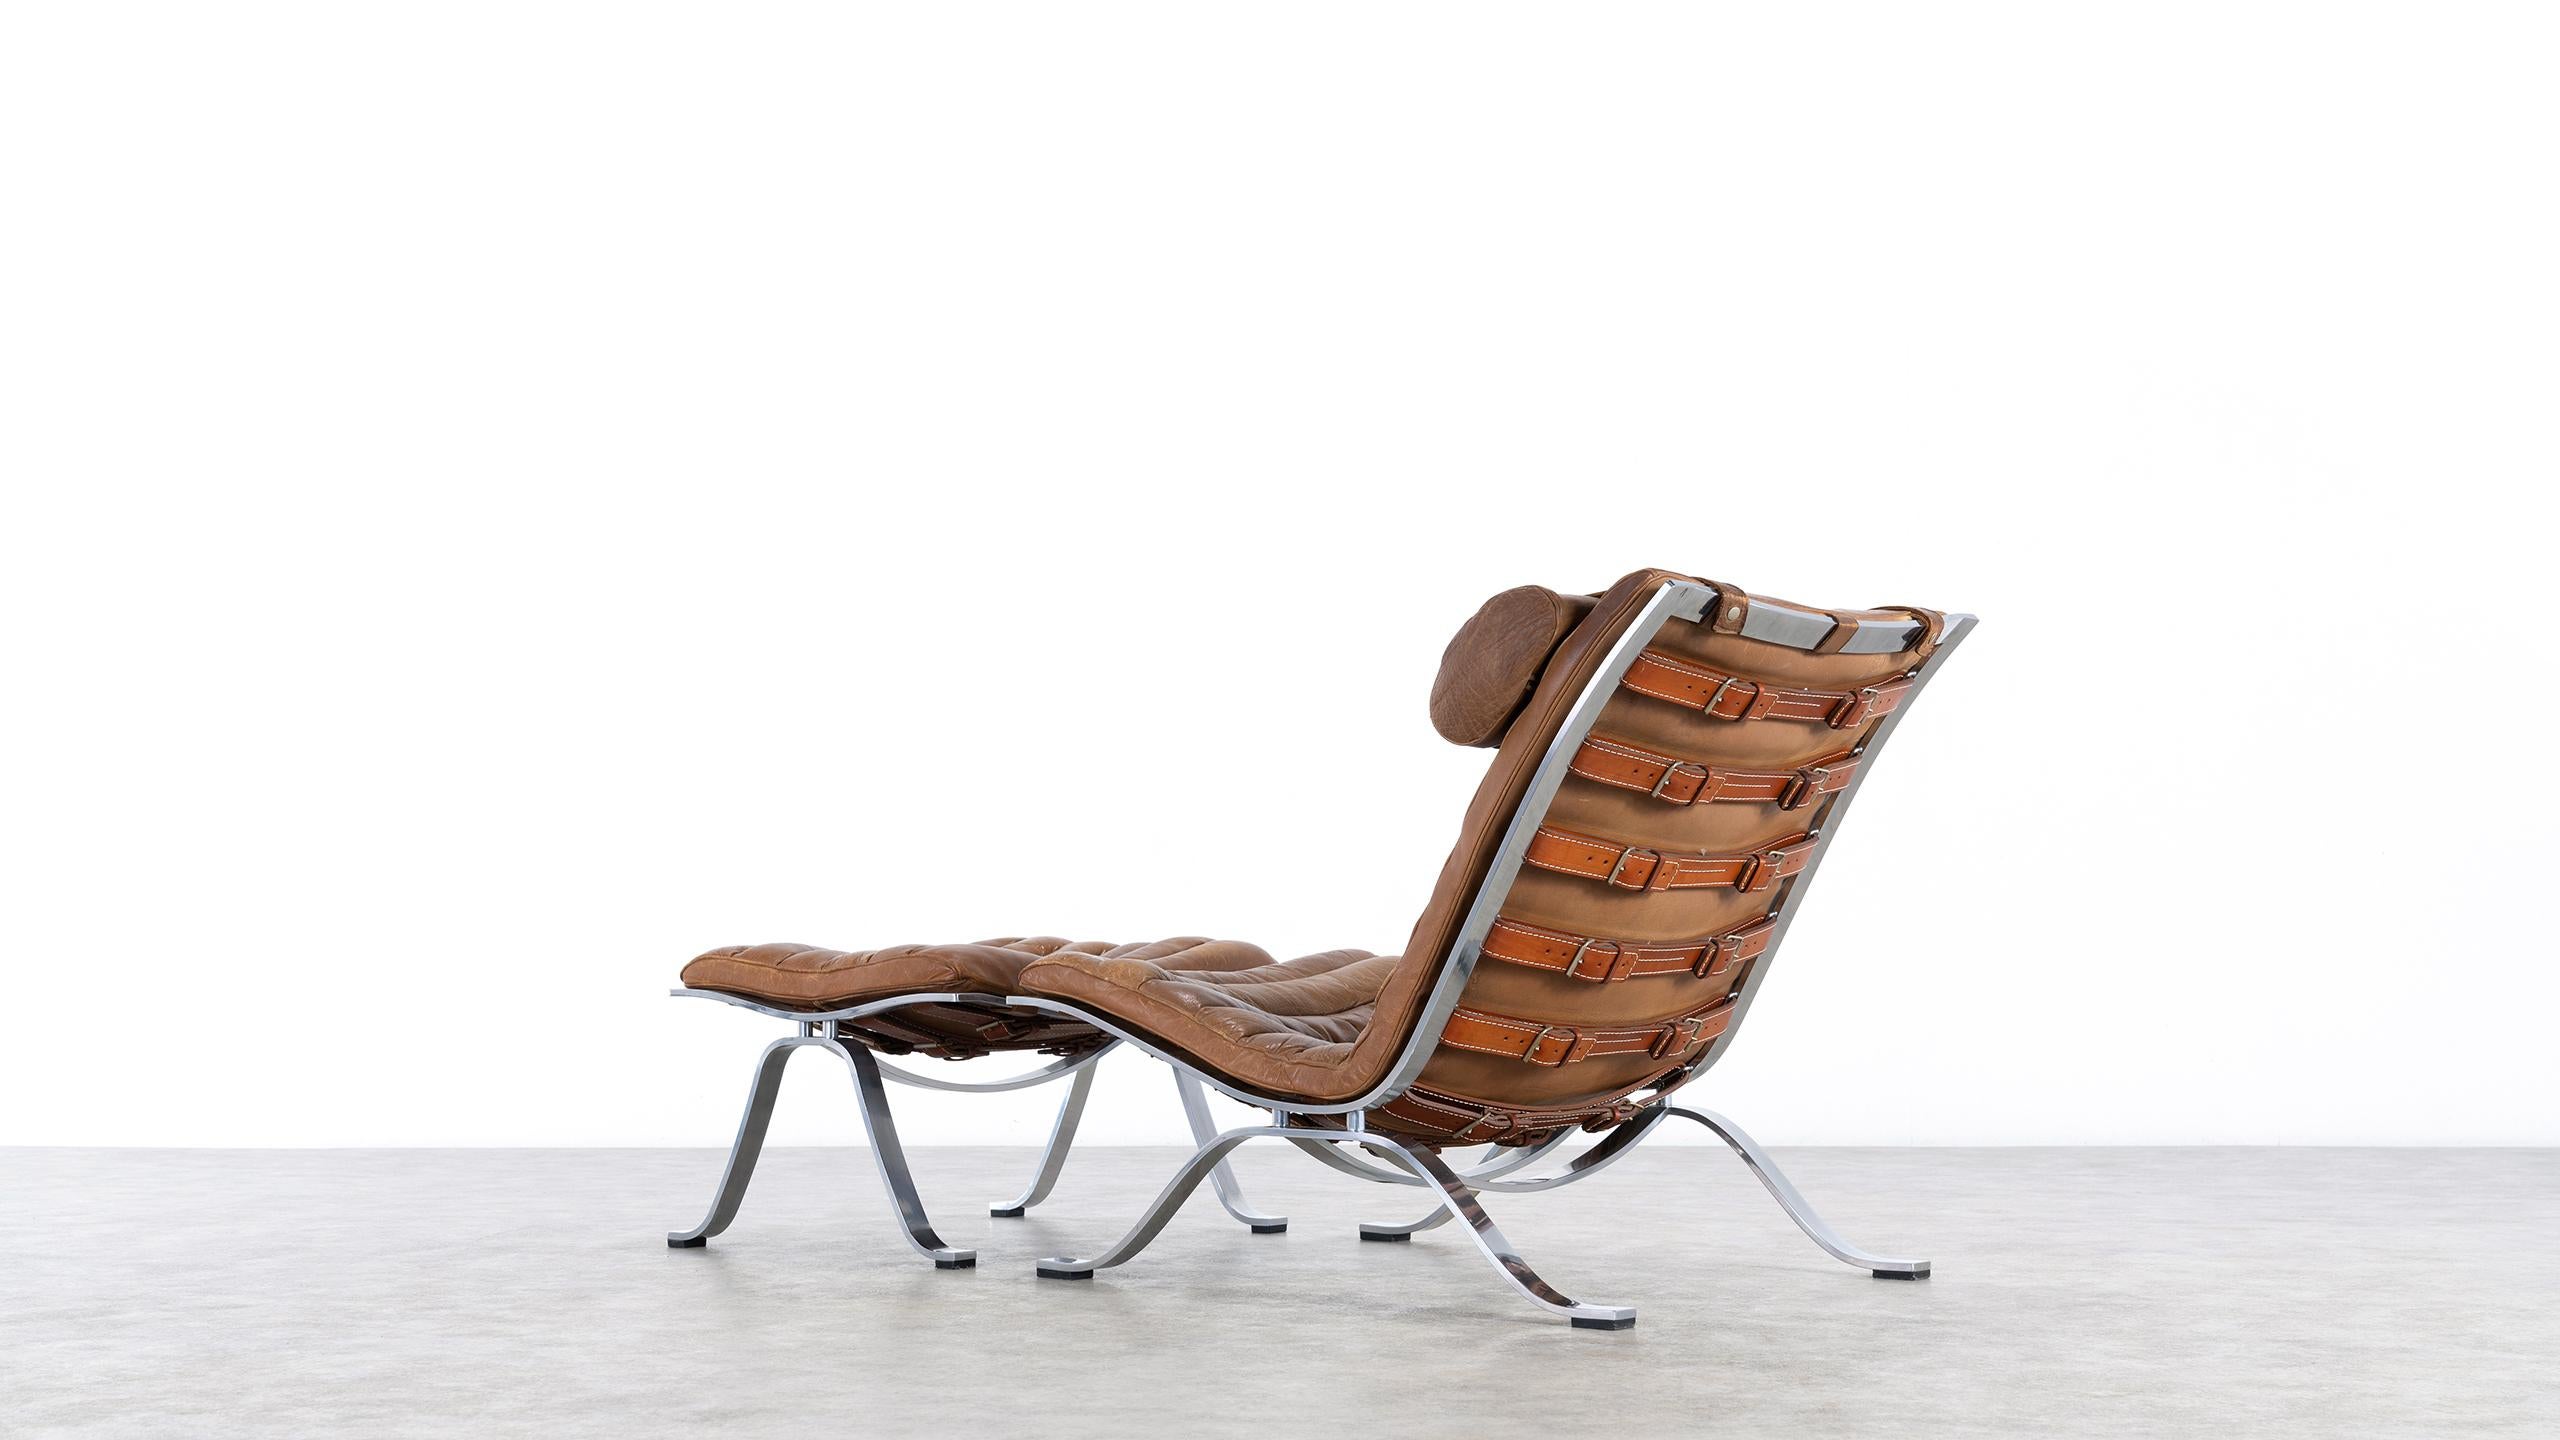 Designed by Arne Norell for Norell Möbel, Aneby, Sweden, 1966.
Fantastic comfortable lounge chair with its footstool...

This award winning lounge chair was made of high quality flat chrome-plated steel and has very thick cognac-colored buffalo